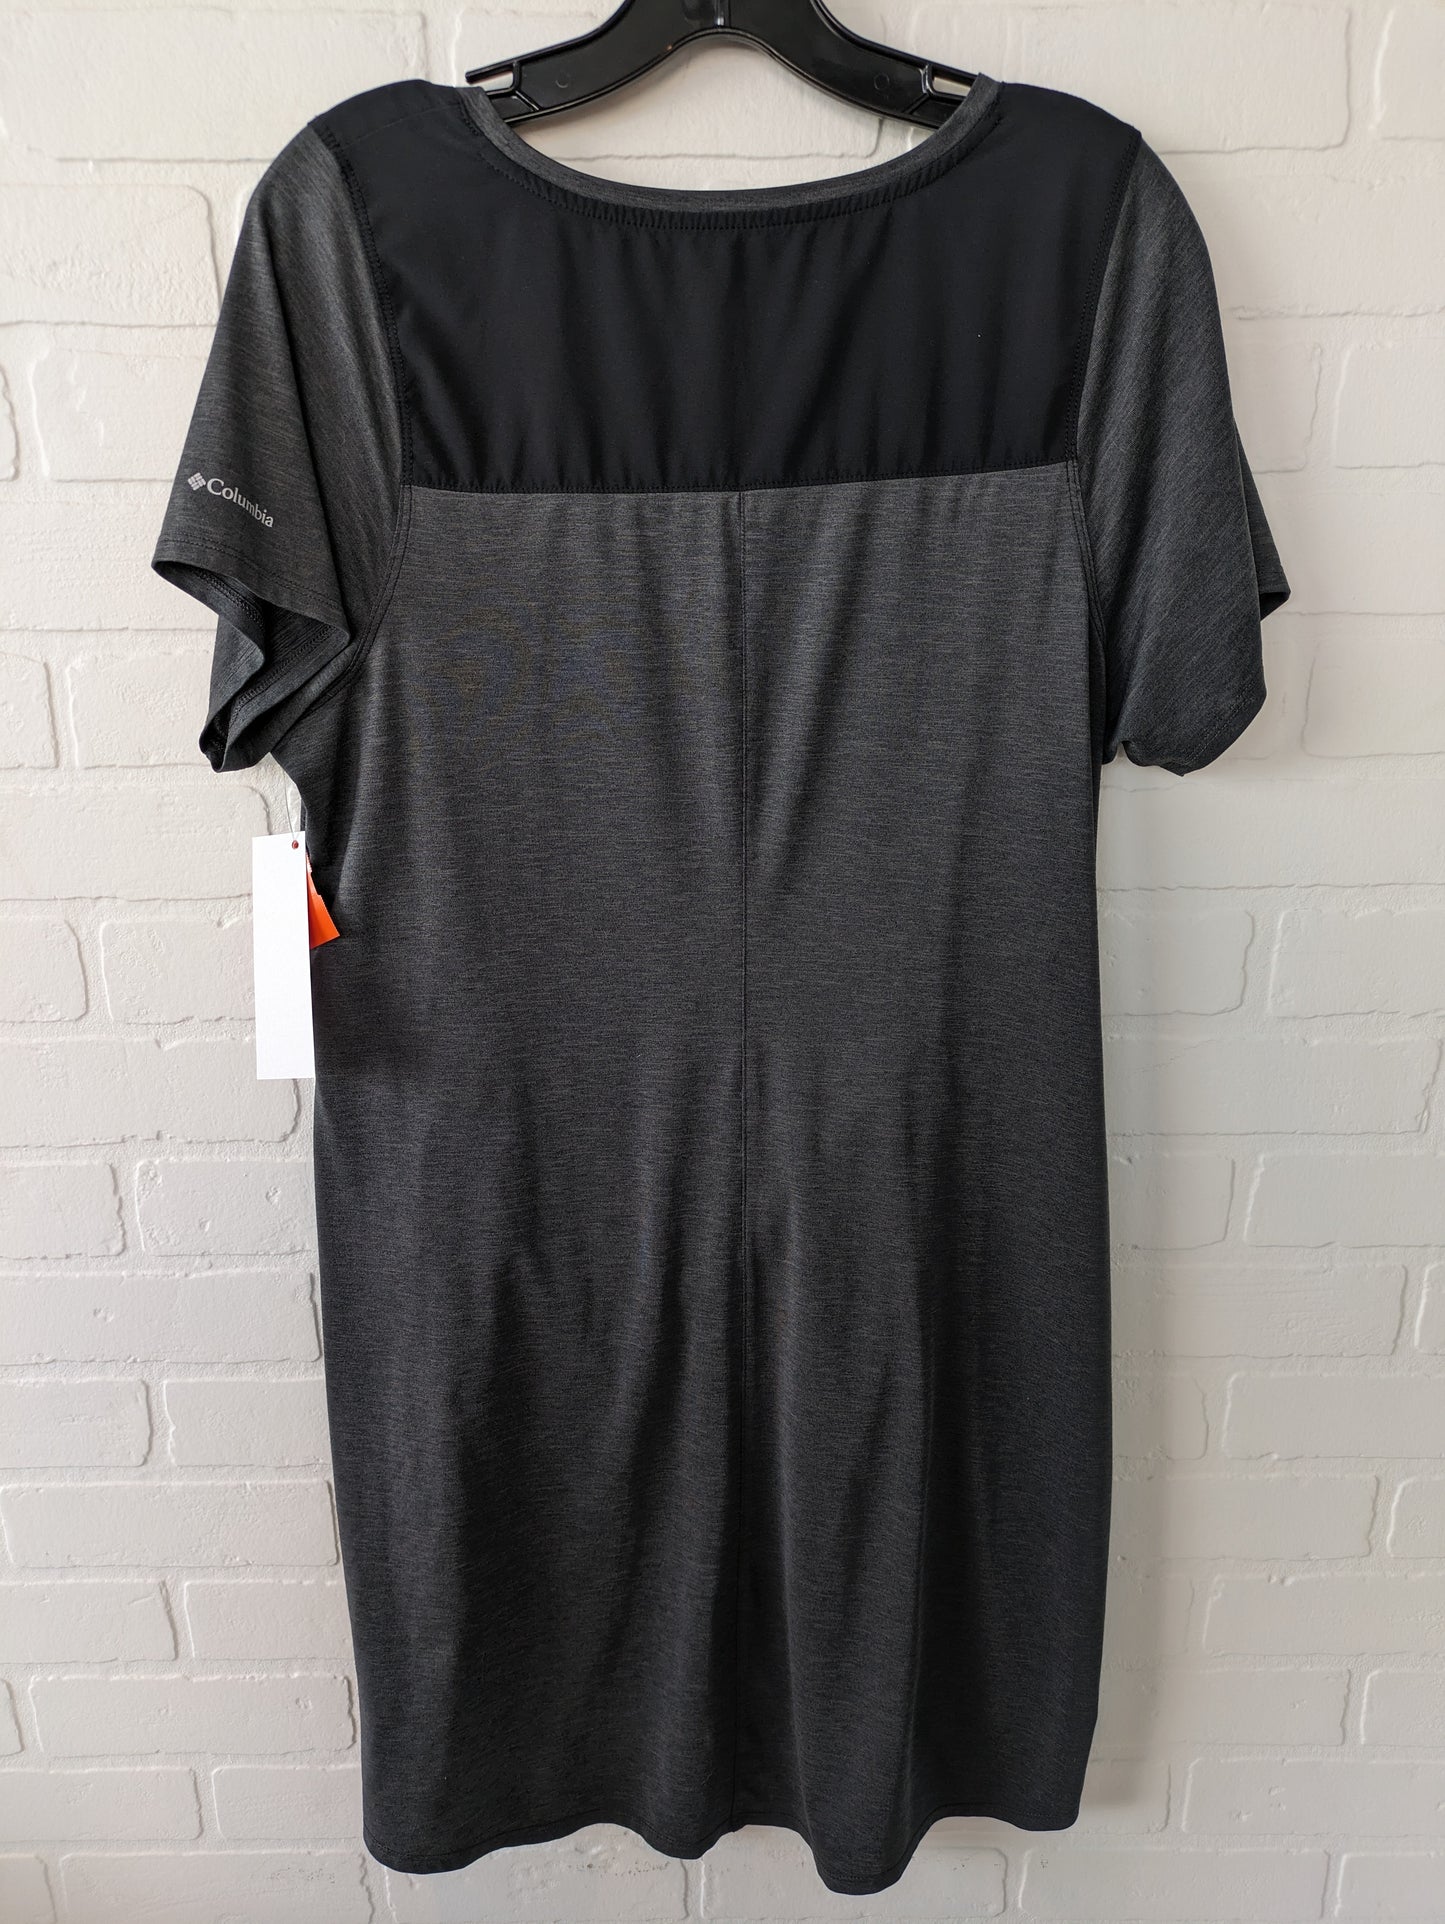 Athletic Dress By Columbia  Size: L